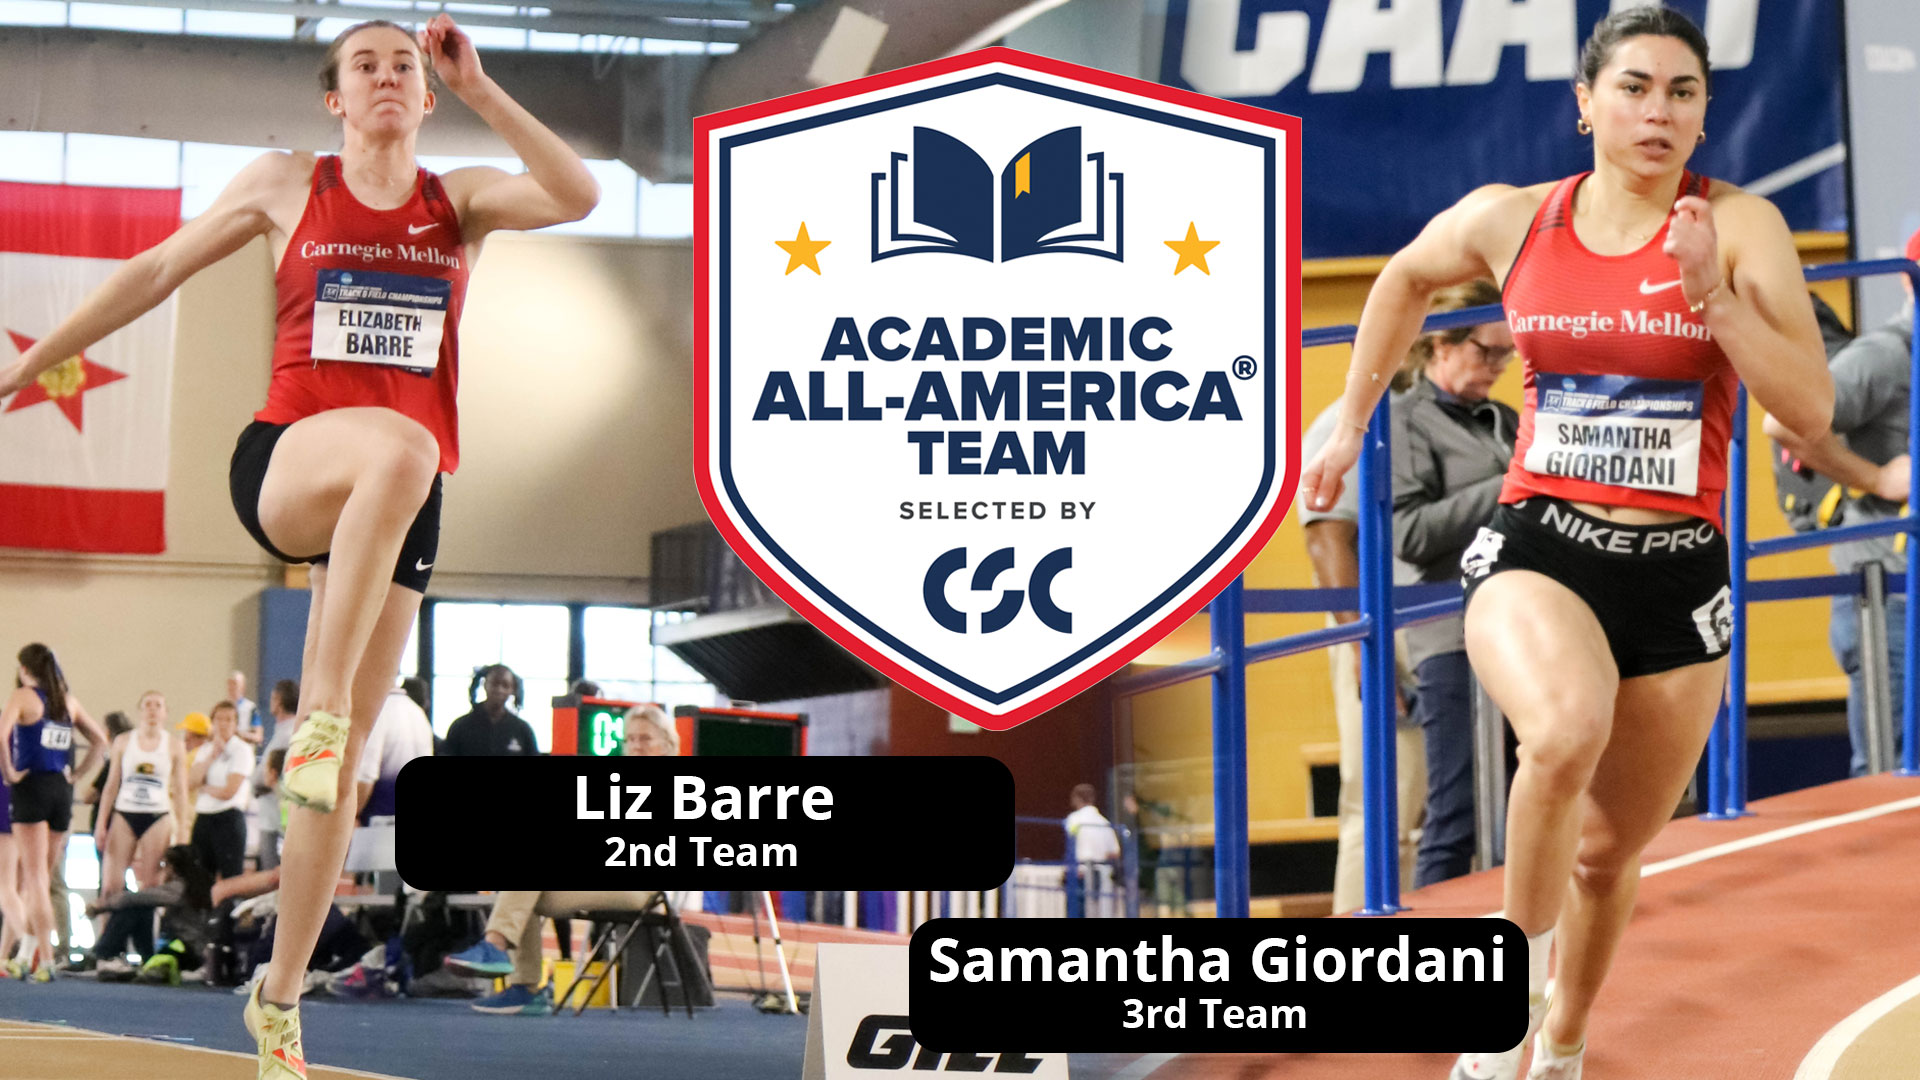 action image of a woman jumping and a woman running with Academic All-America logo in the center and text reading Liz Barre 2nd Team and Samantha Giordani 3rd Team